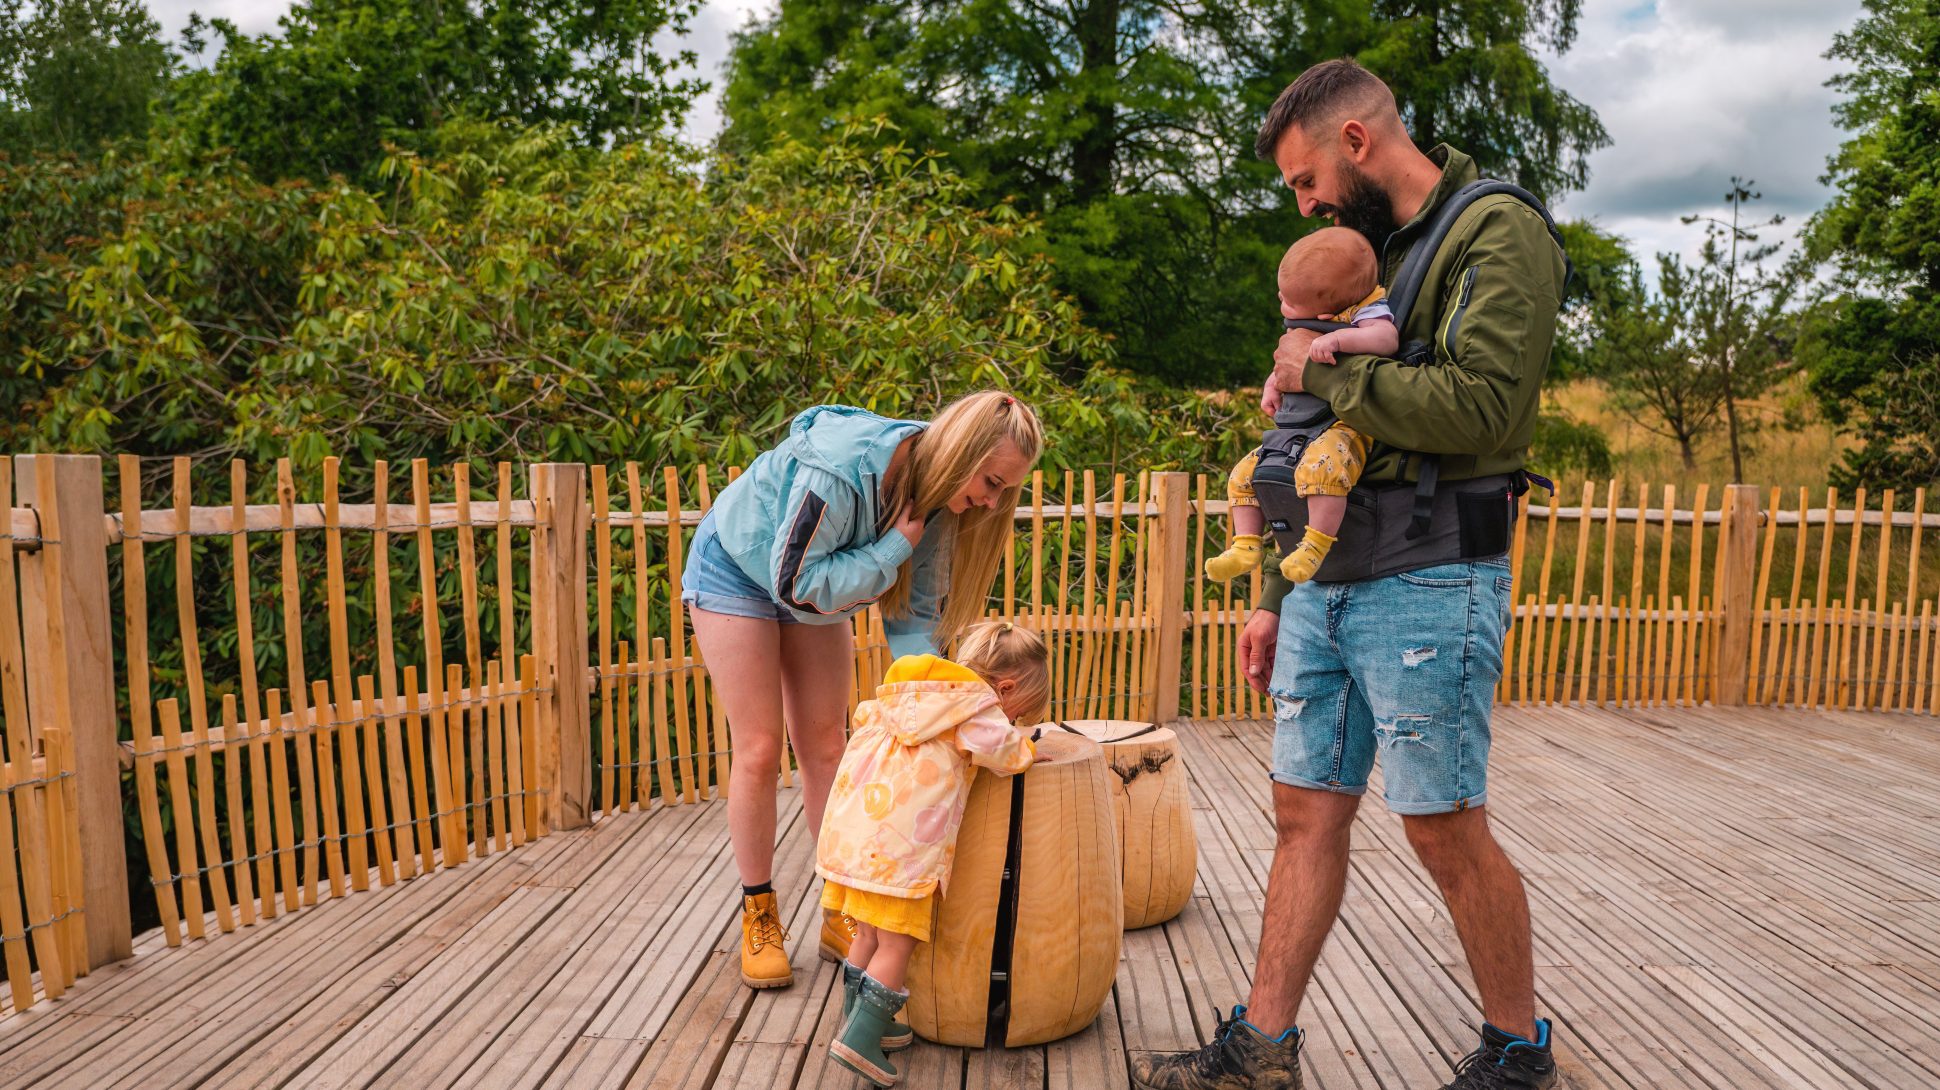 A family investigate wooden seats on a wooden decked viewing platform